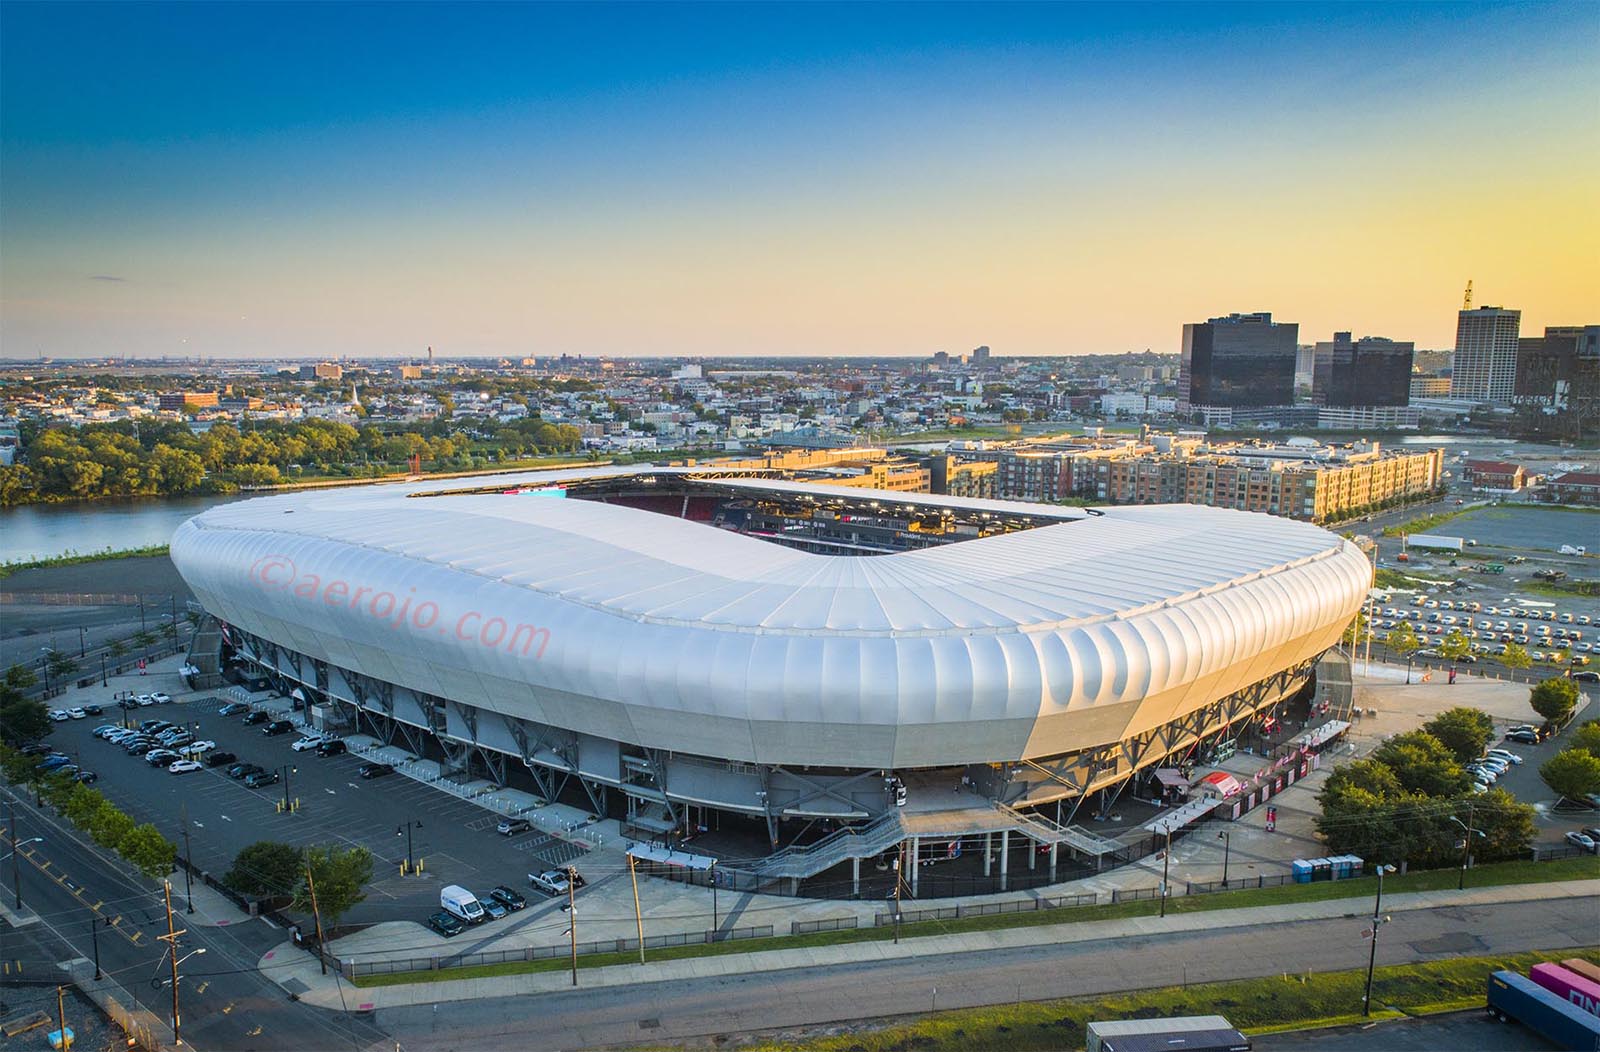 Drone Photograph taken at sunset of Red Bull Arena Harrison New Jersey